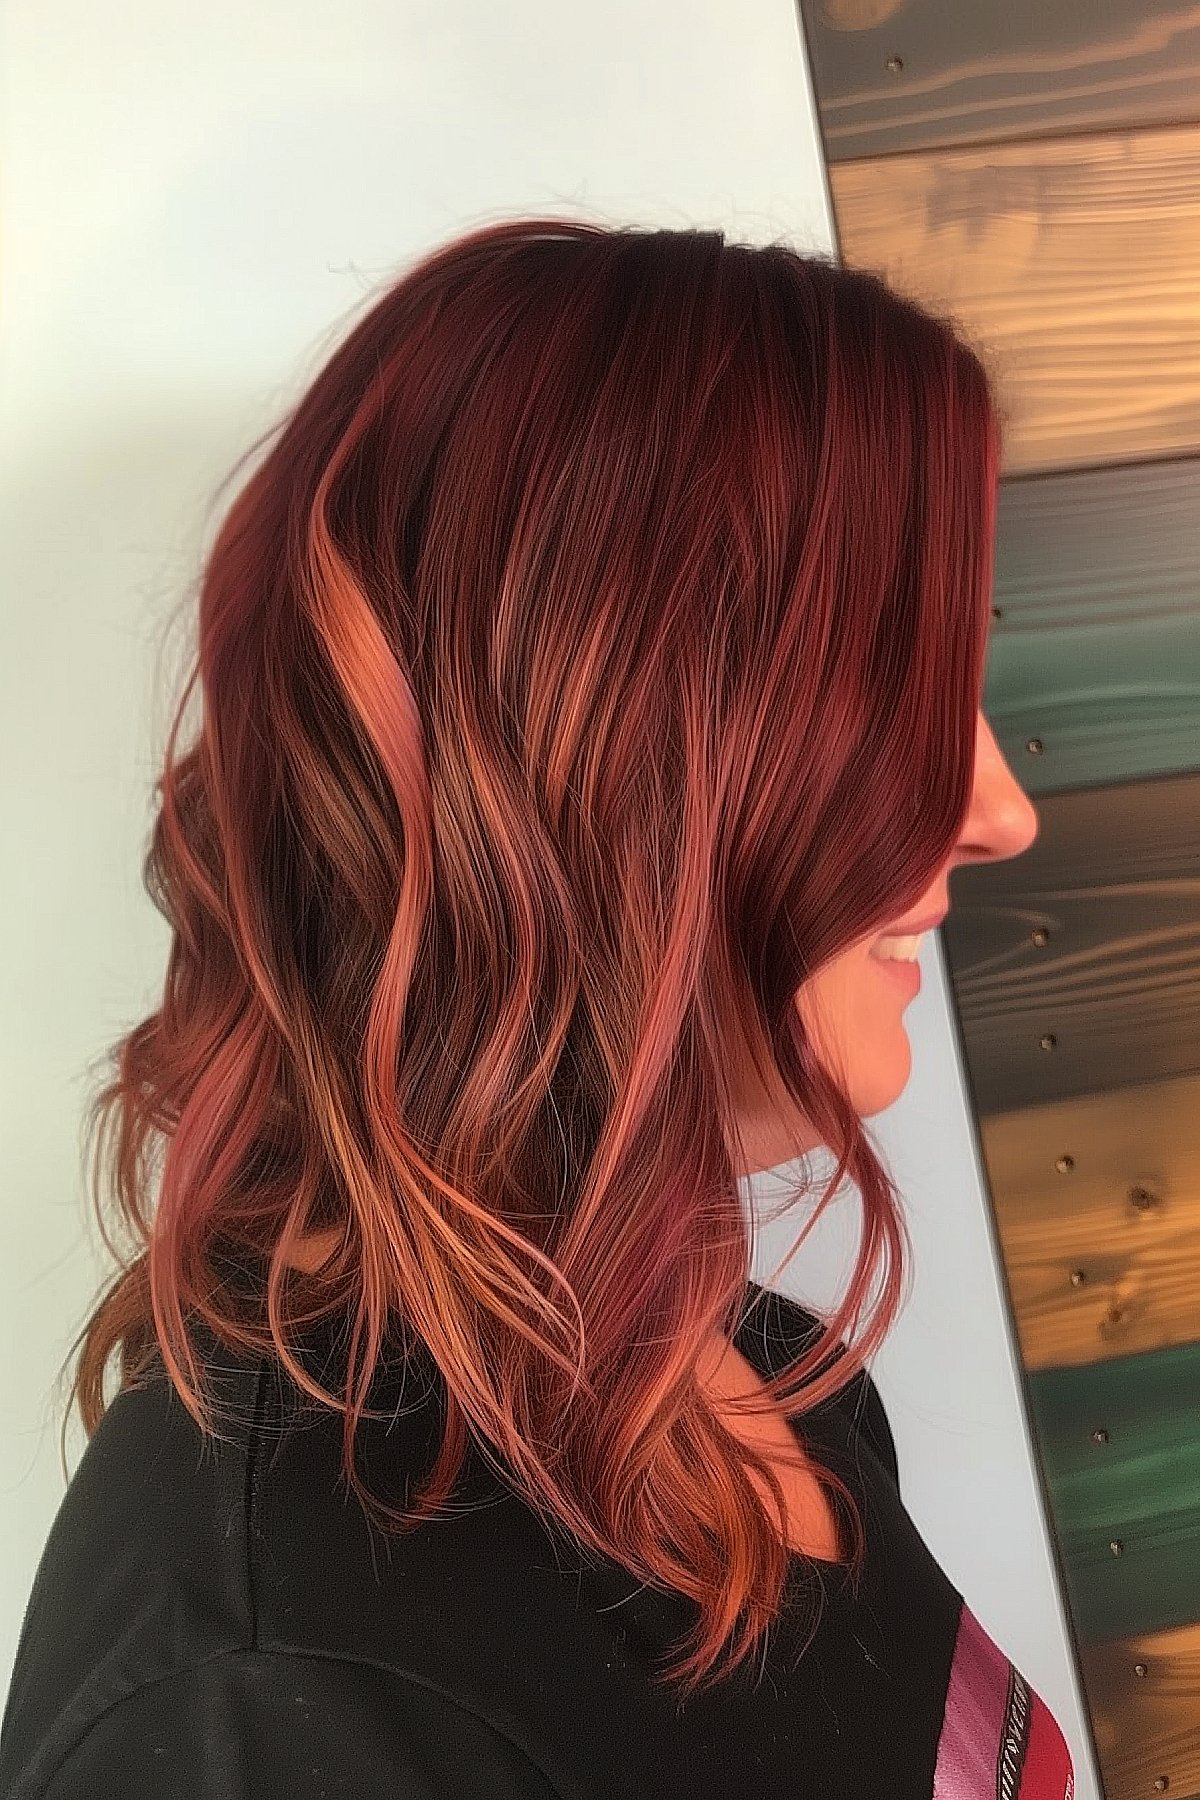 Medium asymmetrical lob with reverse ombre from dark red to copper